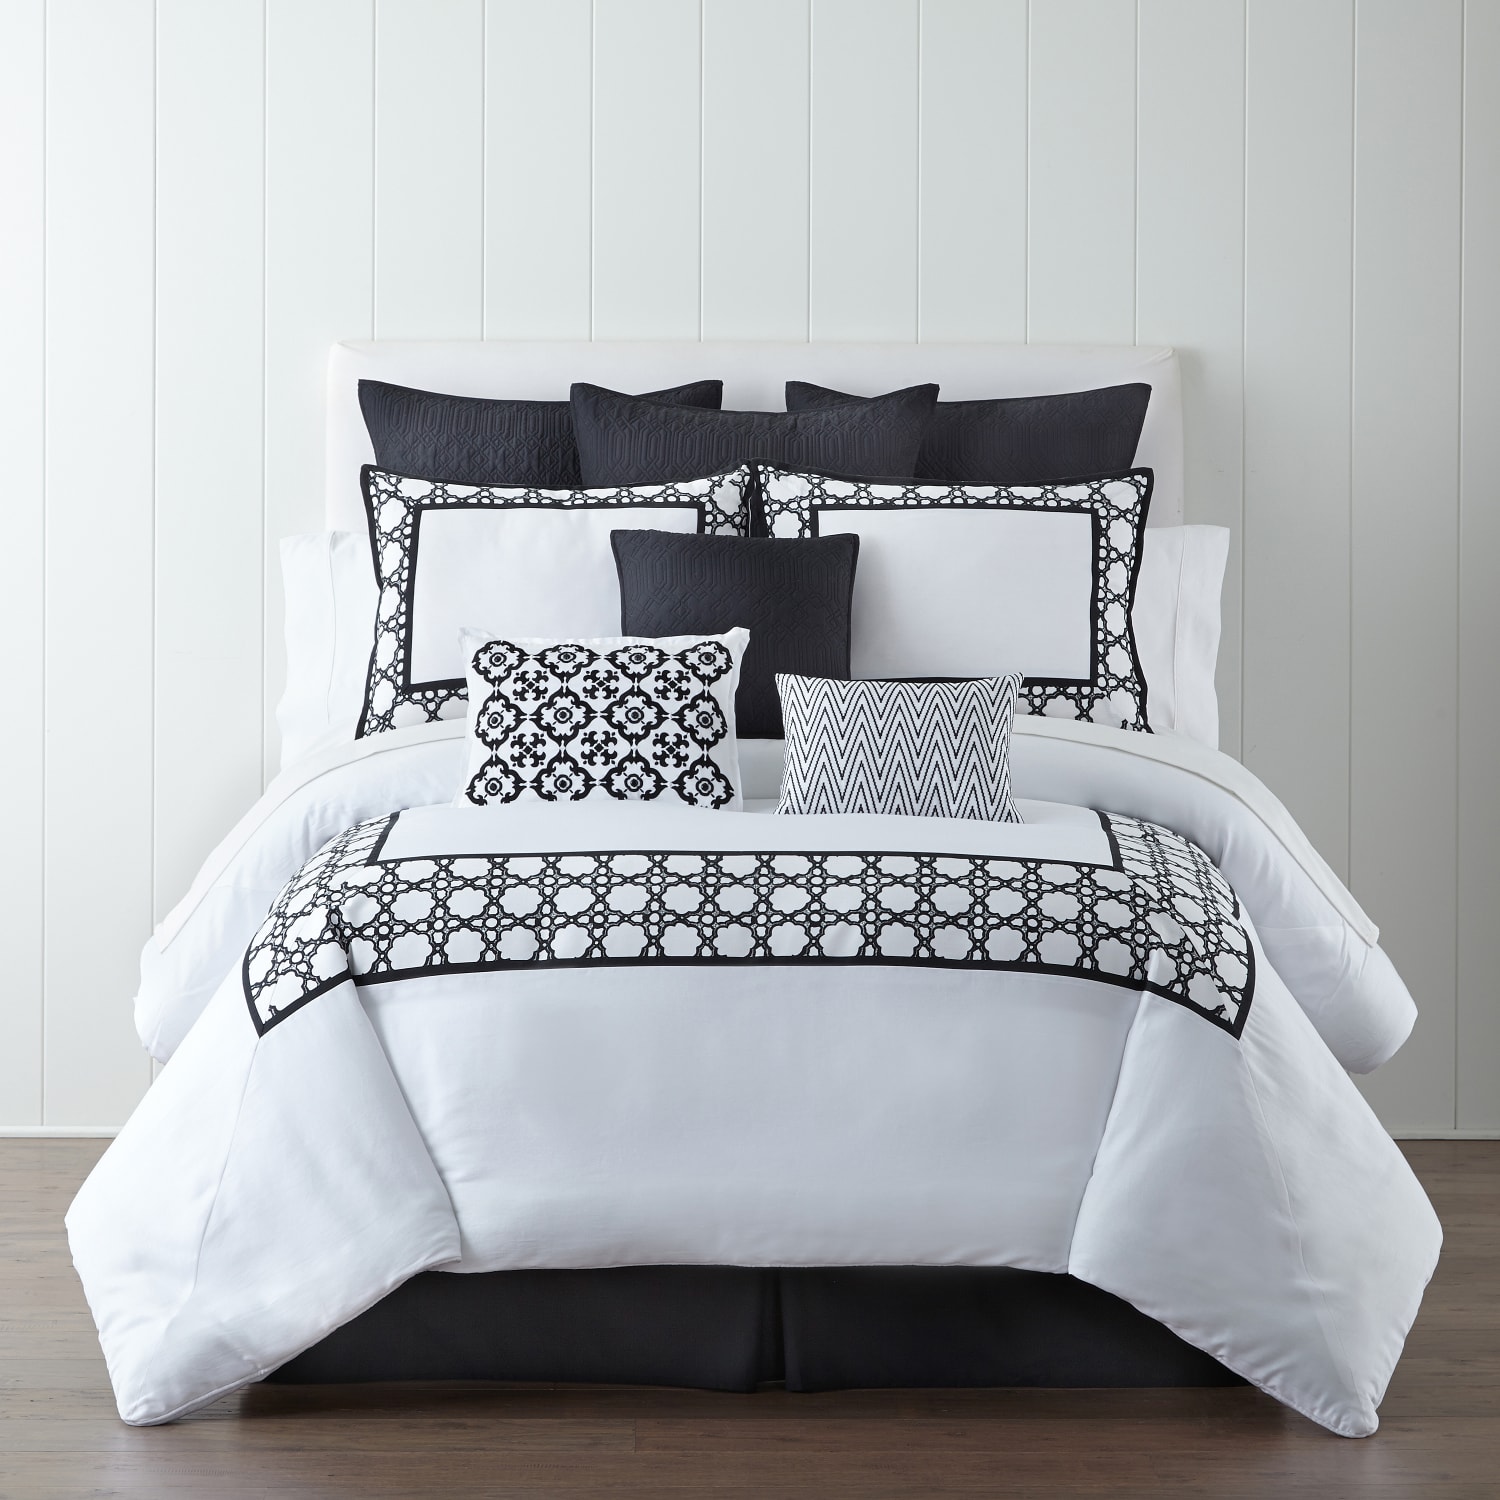 Eva Longoria teams up with JC Penney for bedding collection